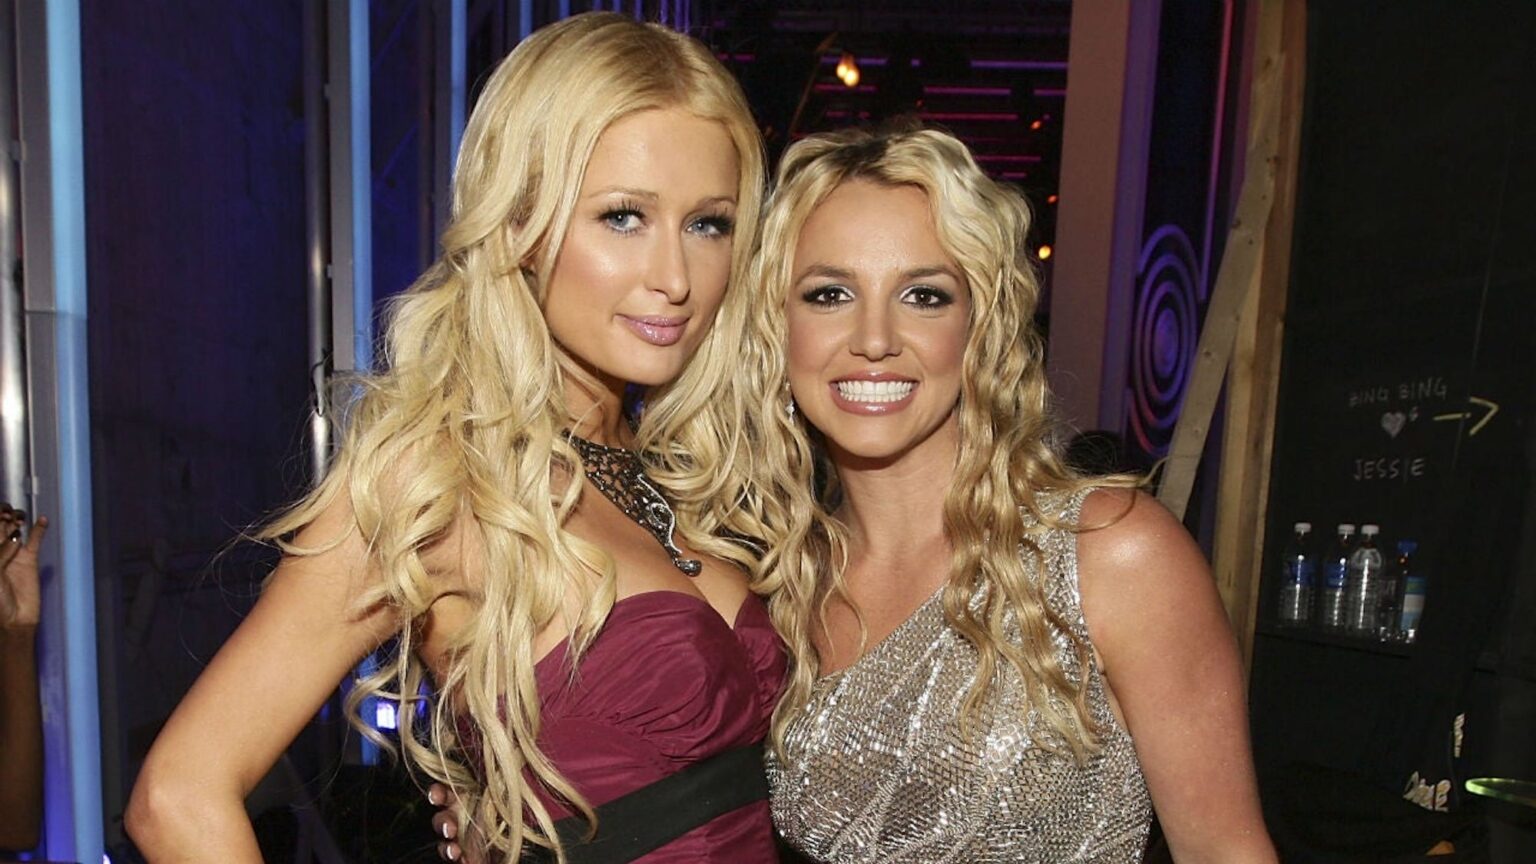 Britney Spears mentioned Pairs Hilton's abuse claims in her testimony about her conservatorship. See how Paris feels about them!